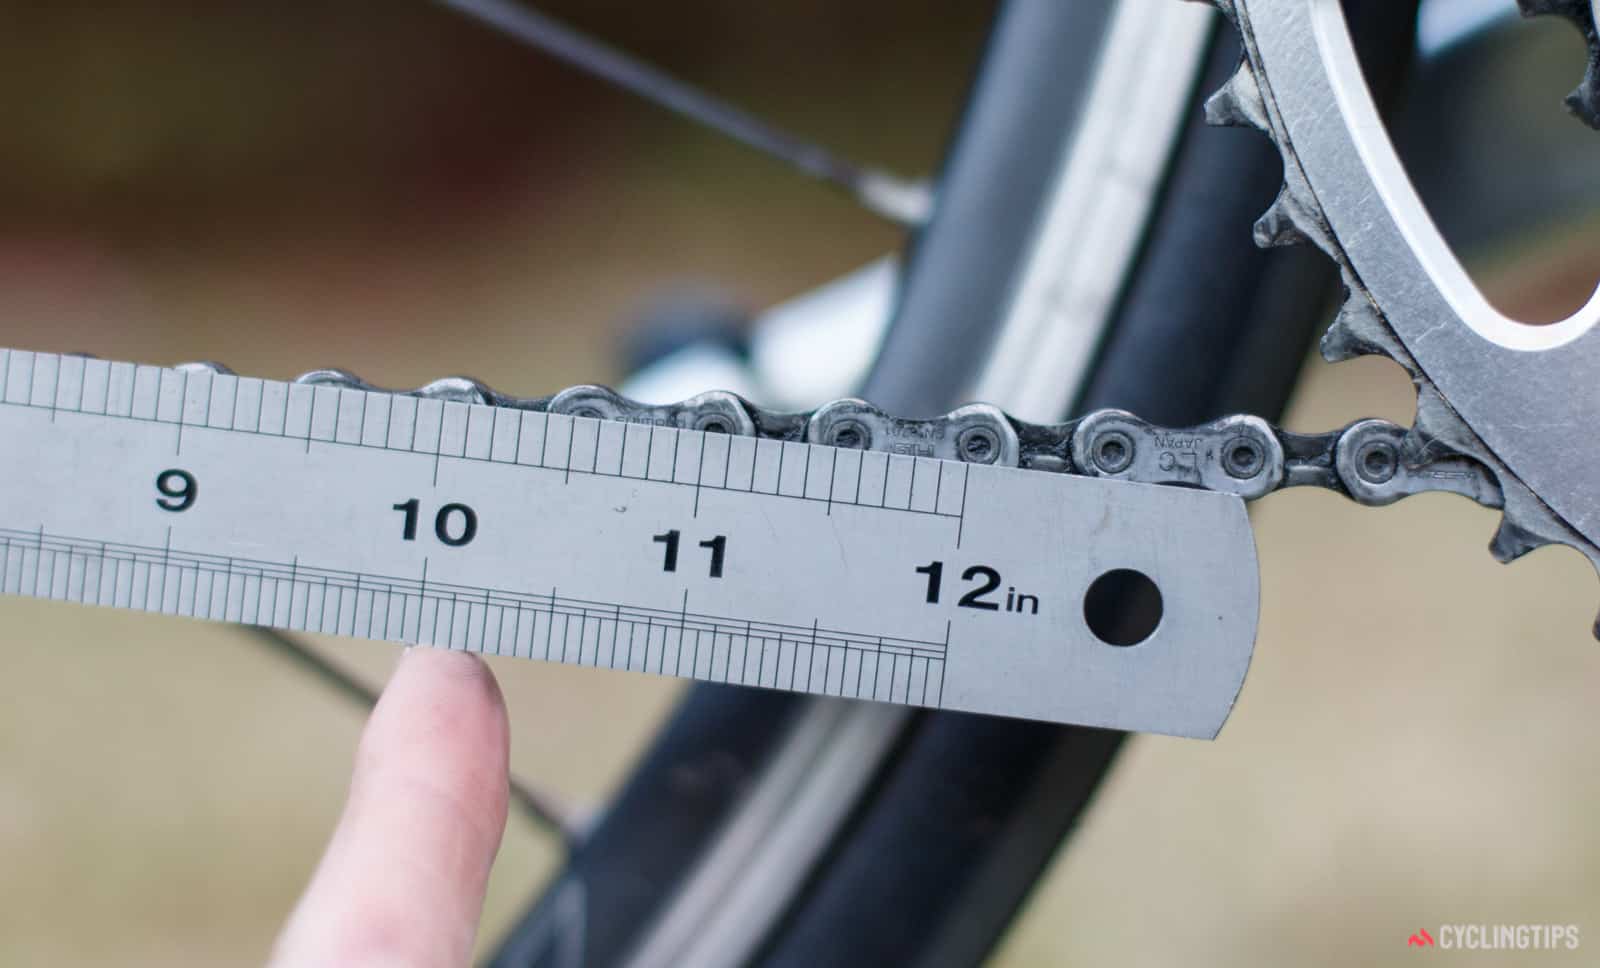 You can also simply use a ruler to see whether your chain is slightly longer than it should be due to stretching.